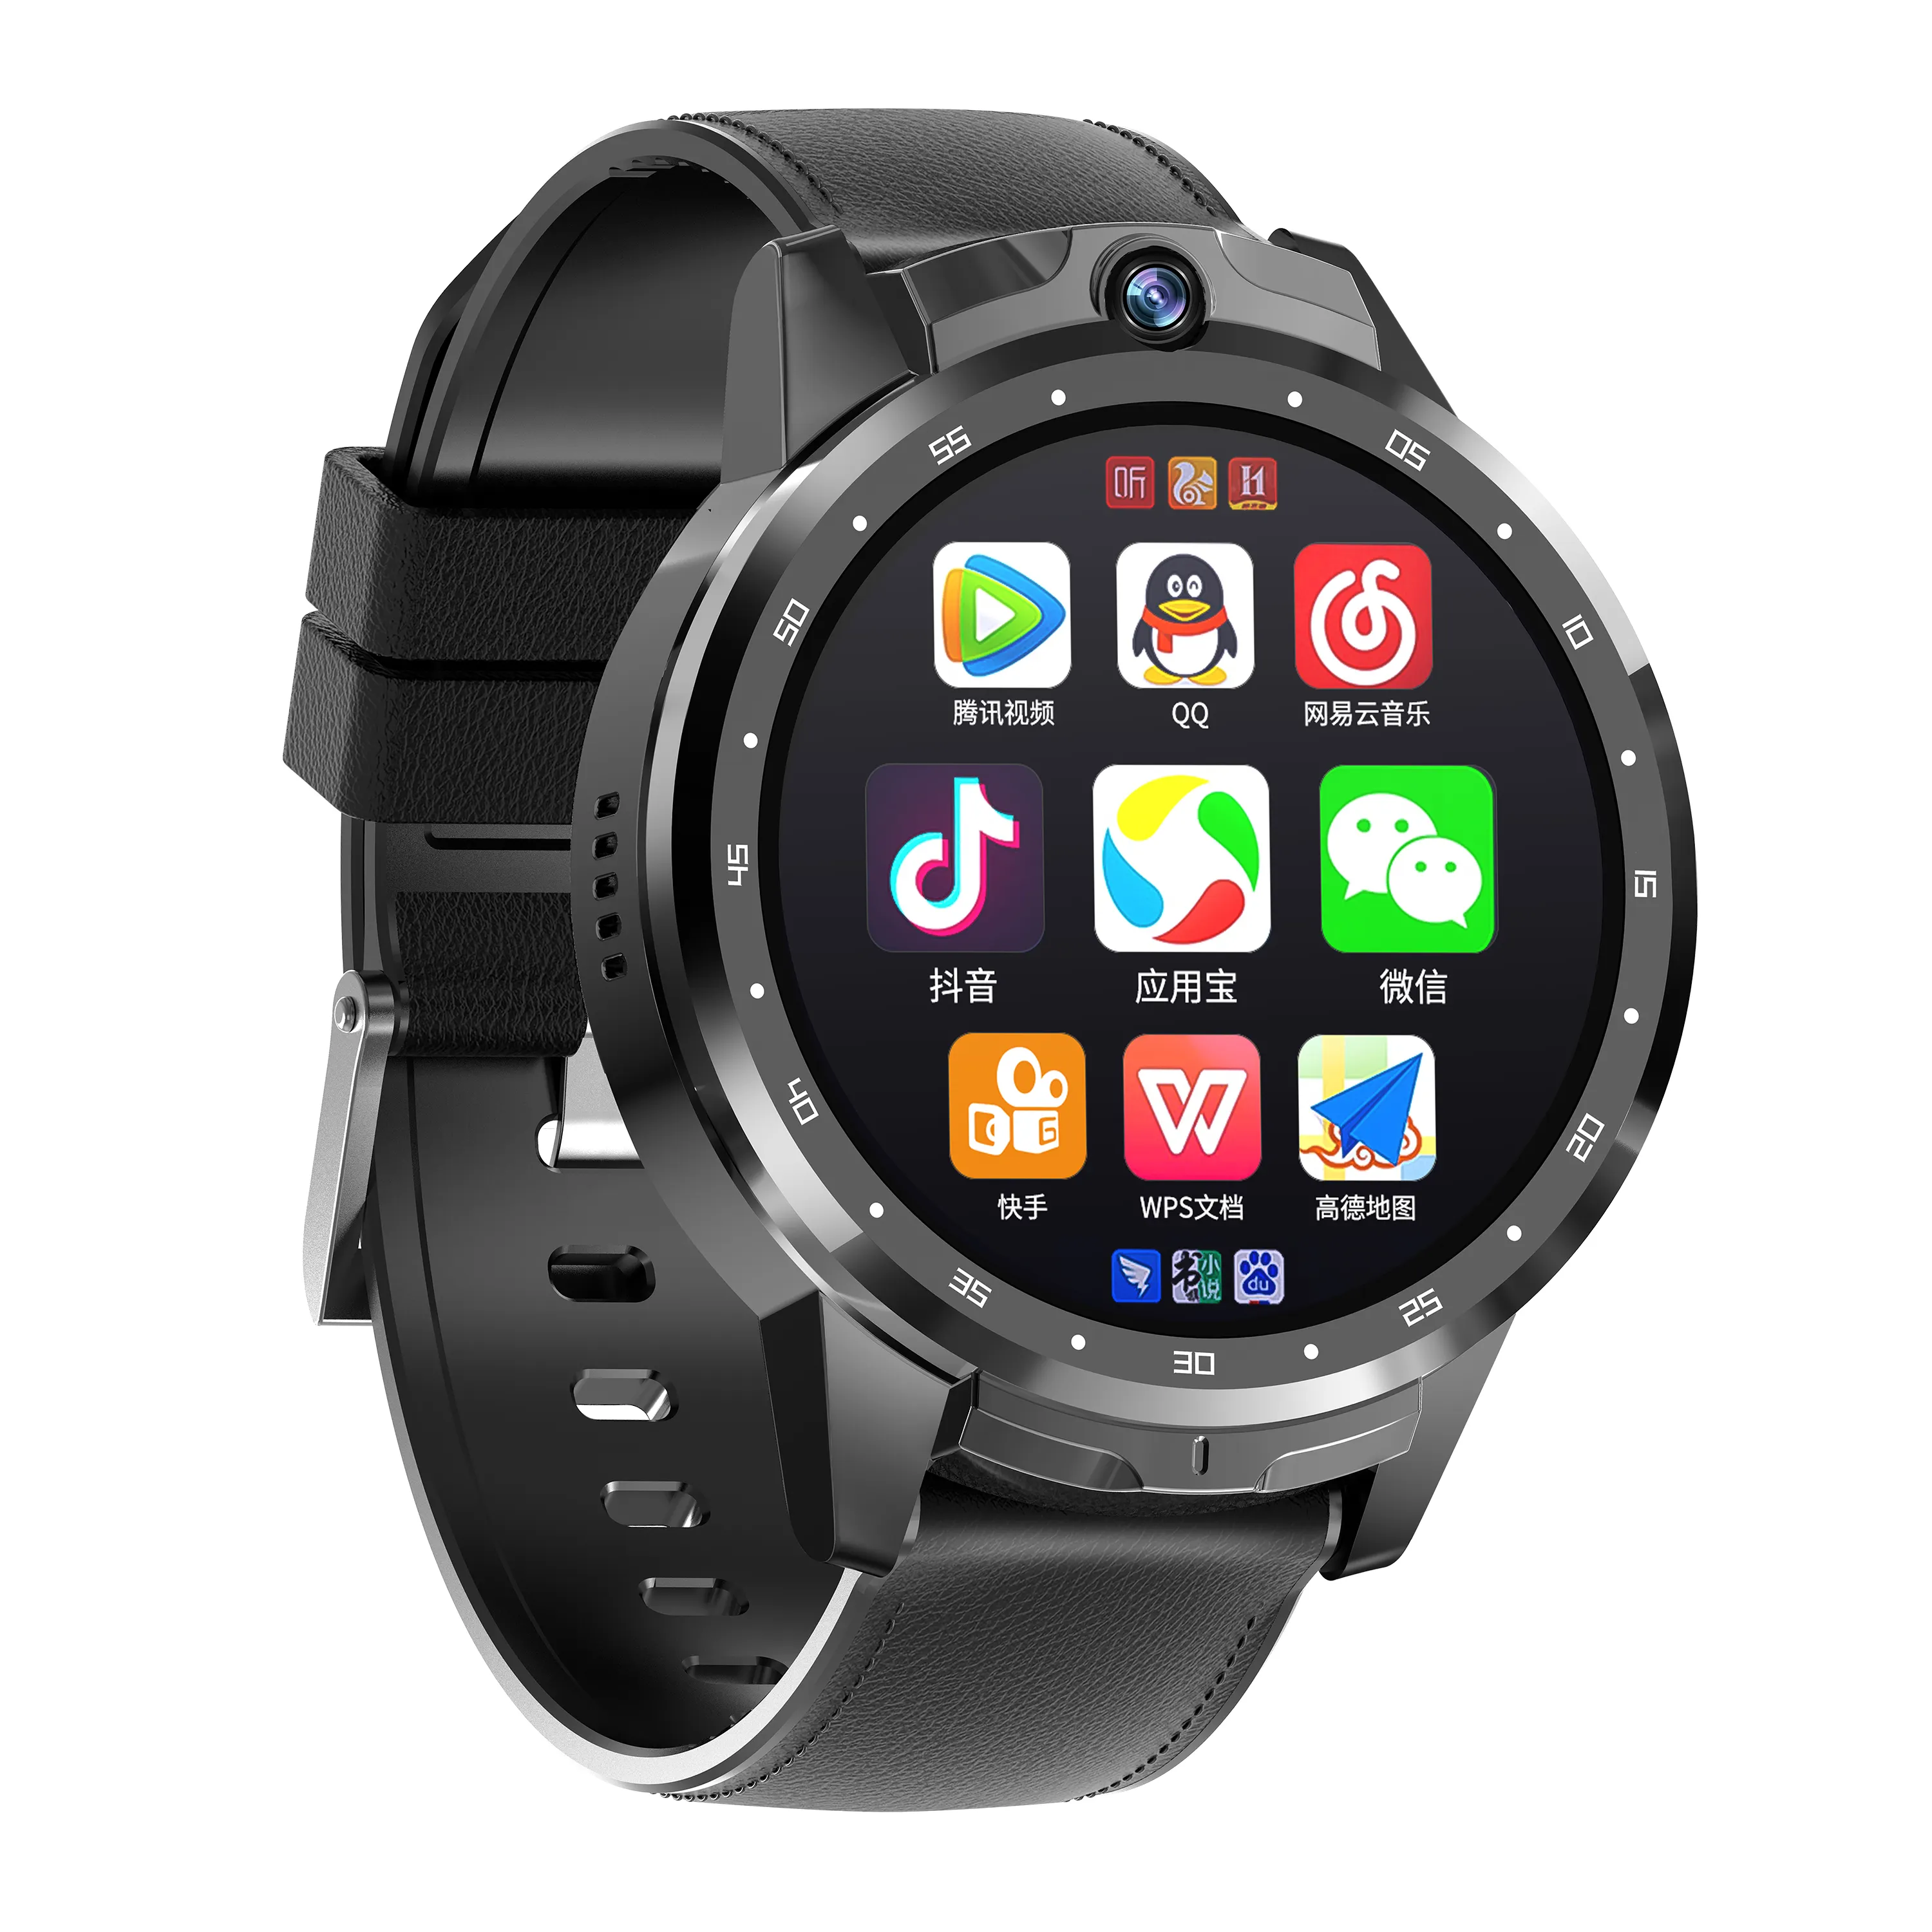 4G Smart watch Android GPS Wifi 4G Smart Watch Phone with 5MP Camera LTE SIM Card Slot Android 8.1 Dual Camera 1.6 inch screen